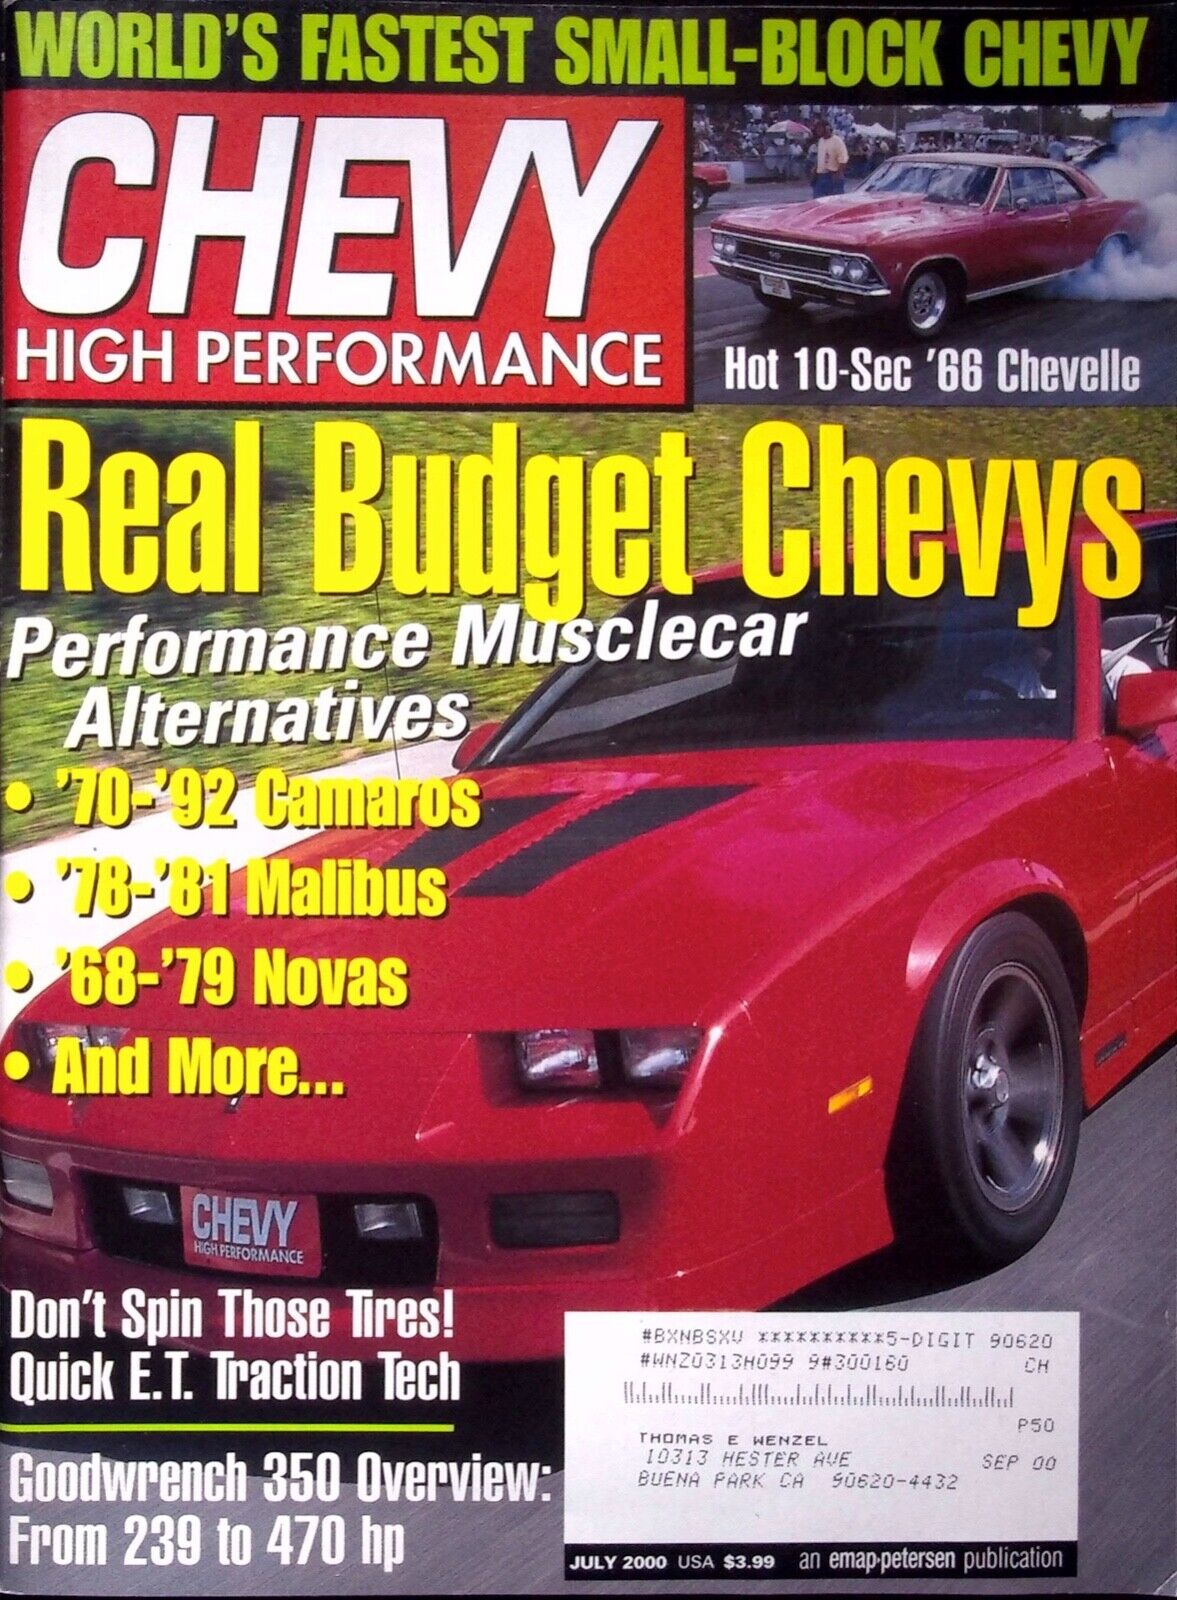 VINTAGE REAL BUDGET CHEVYS - CHEVY HIGH PERFORMANCE MAGAZINE, JULY 2000